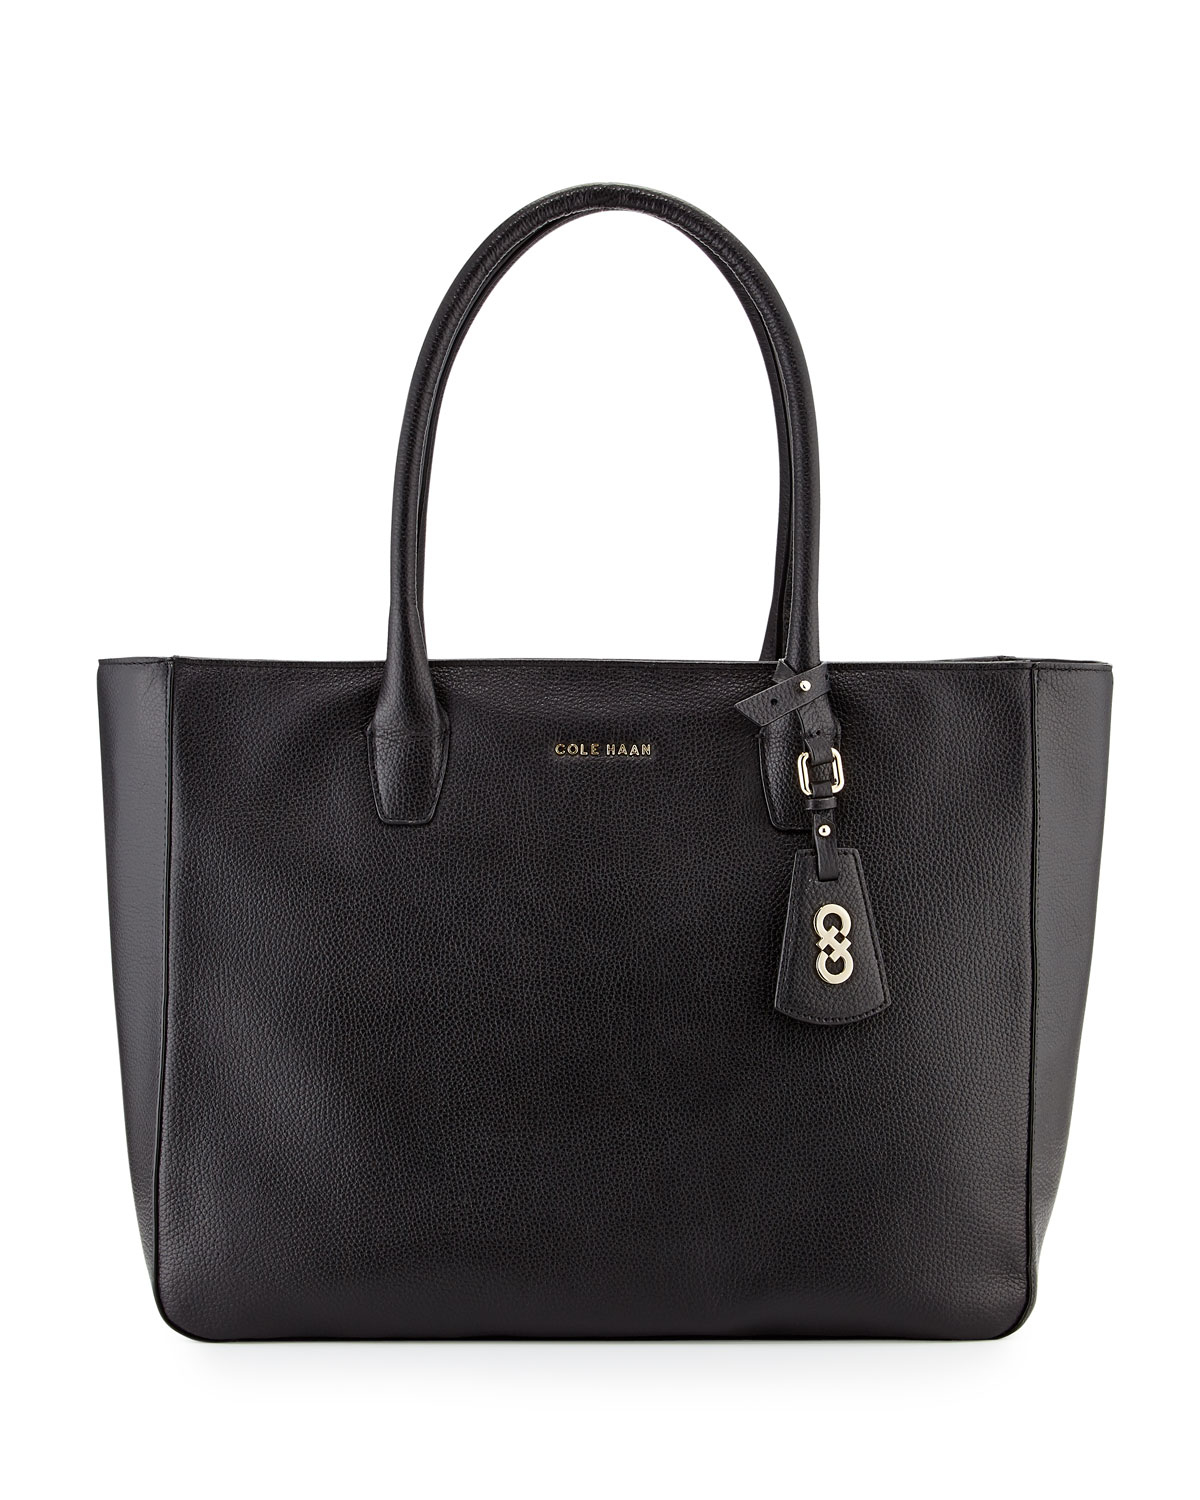 Cole haan Isabella Large Leather Tote Bag in Black | Lyst